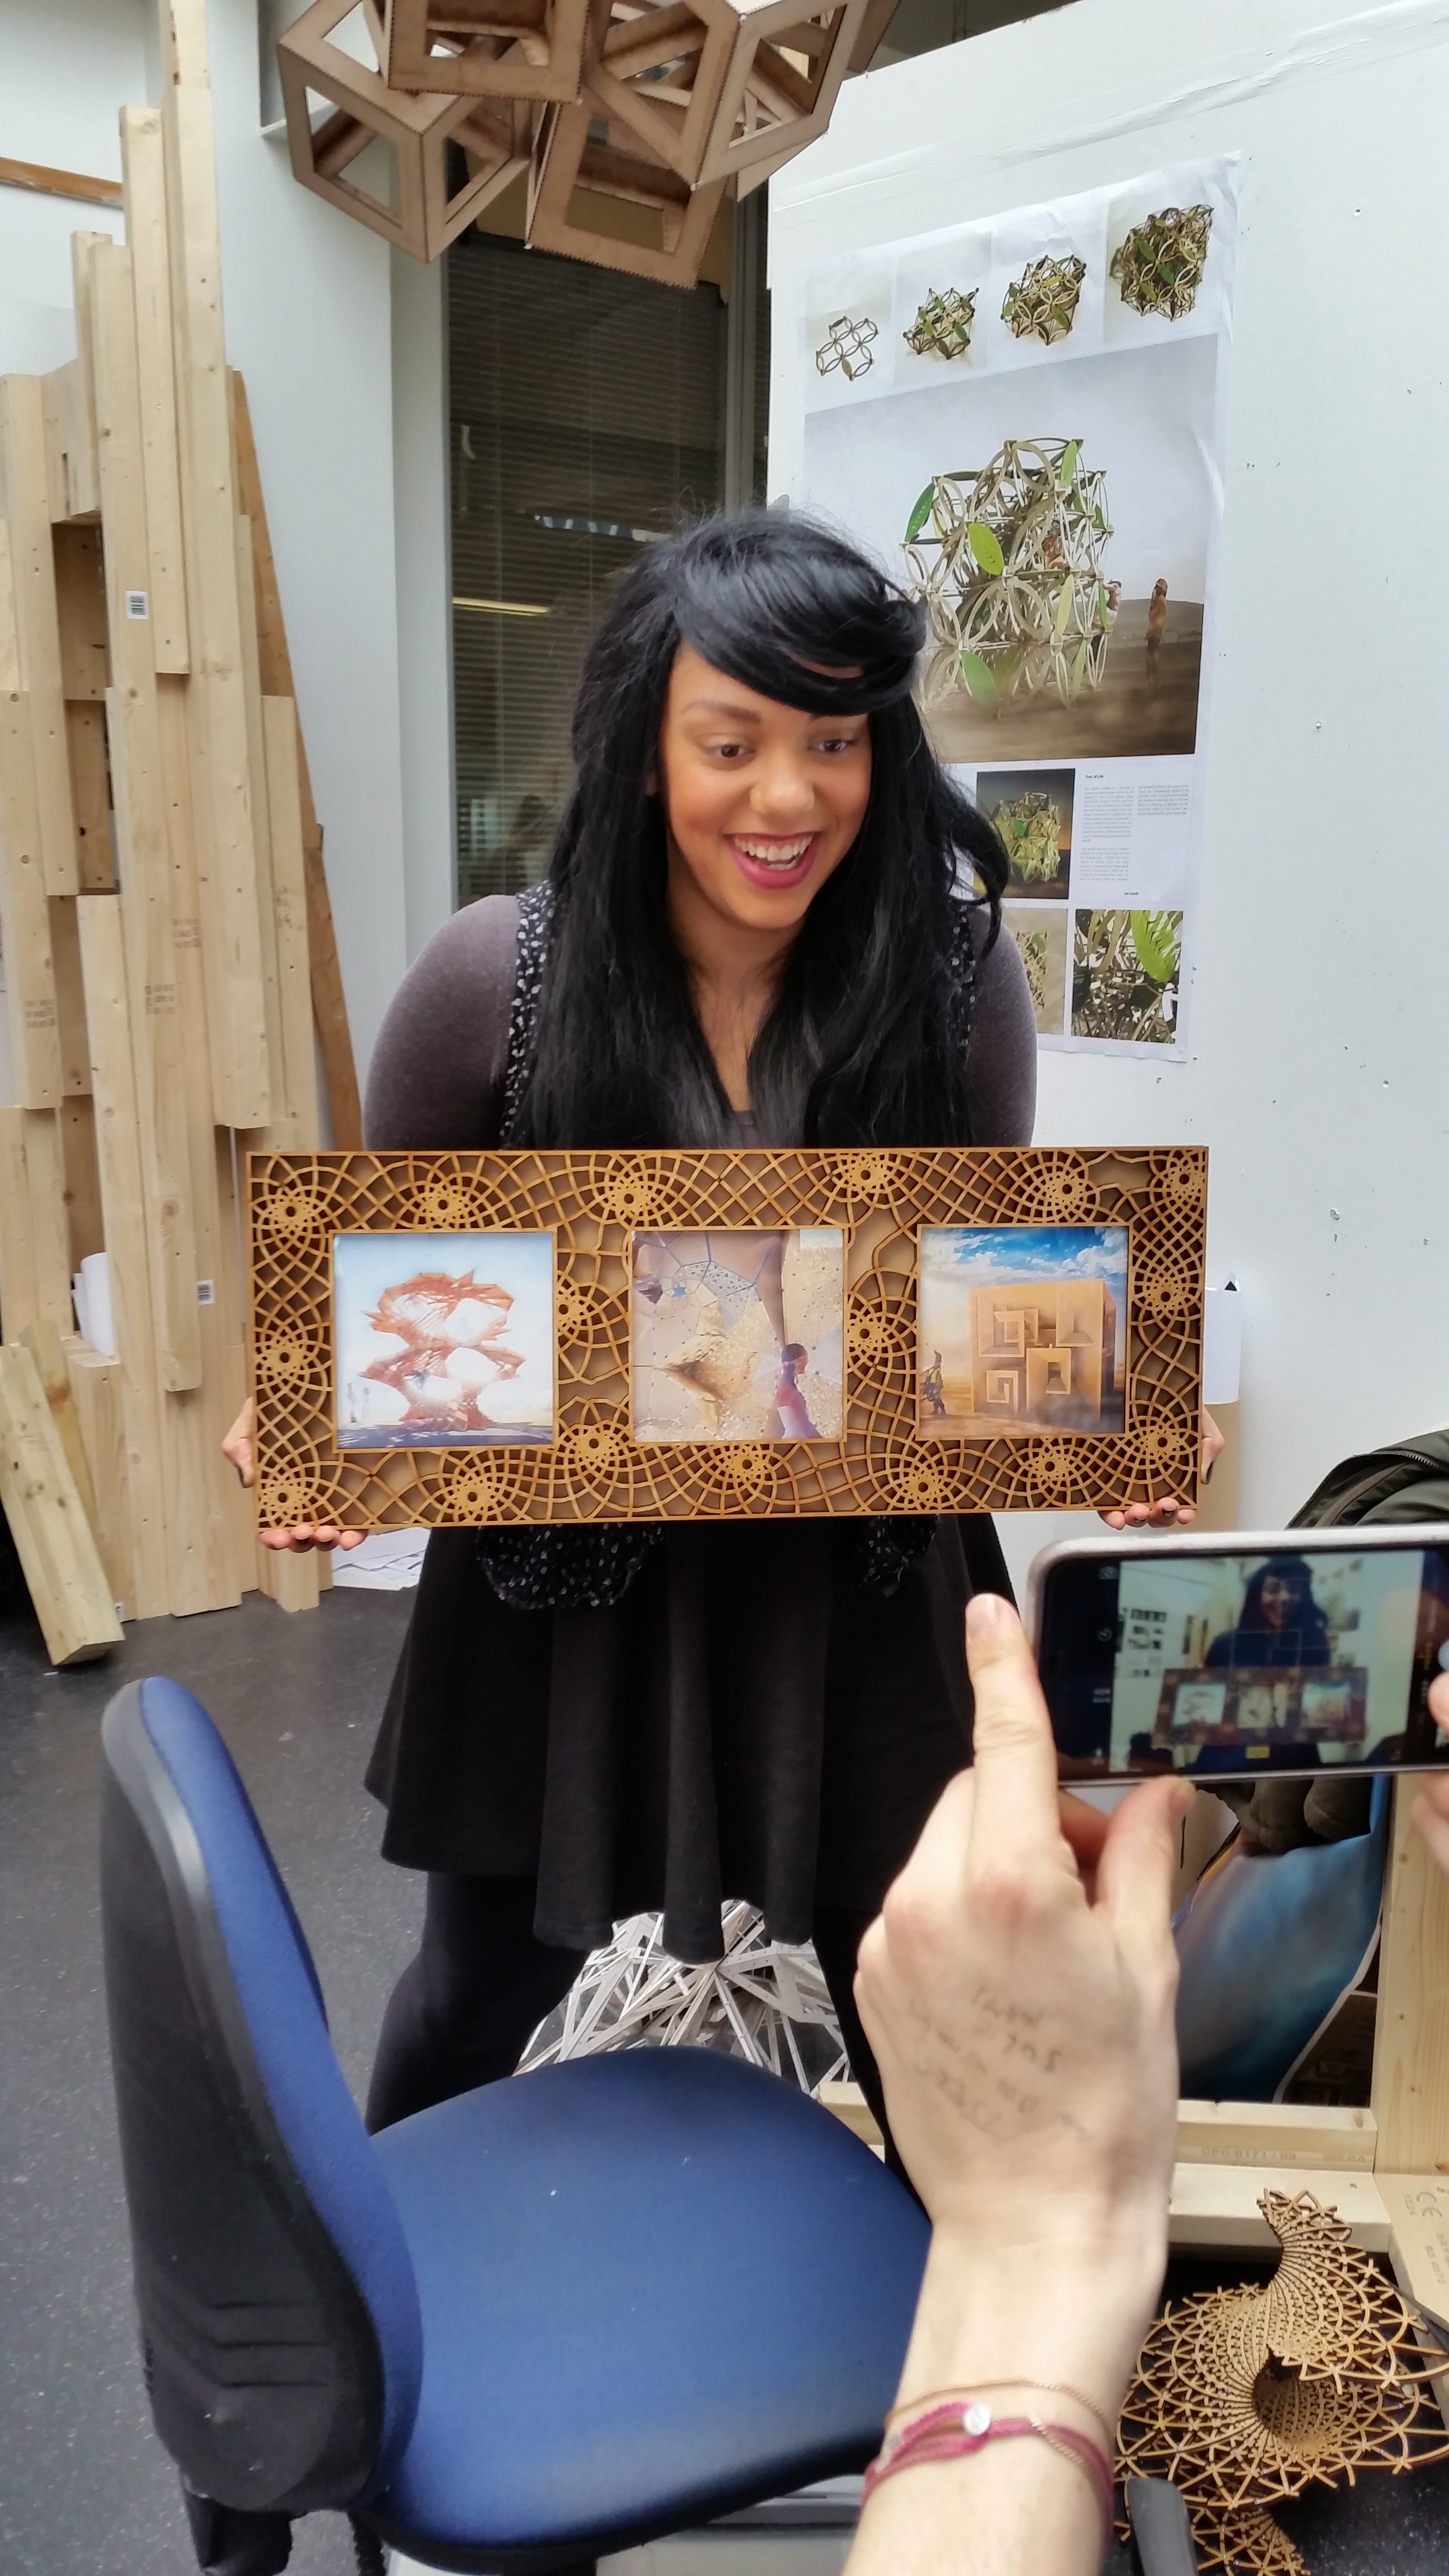 Lorna Jackson showing one of the gifts for our Kickstarter Campaign